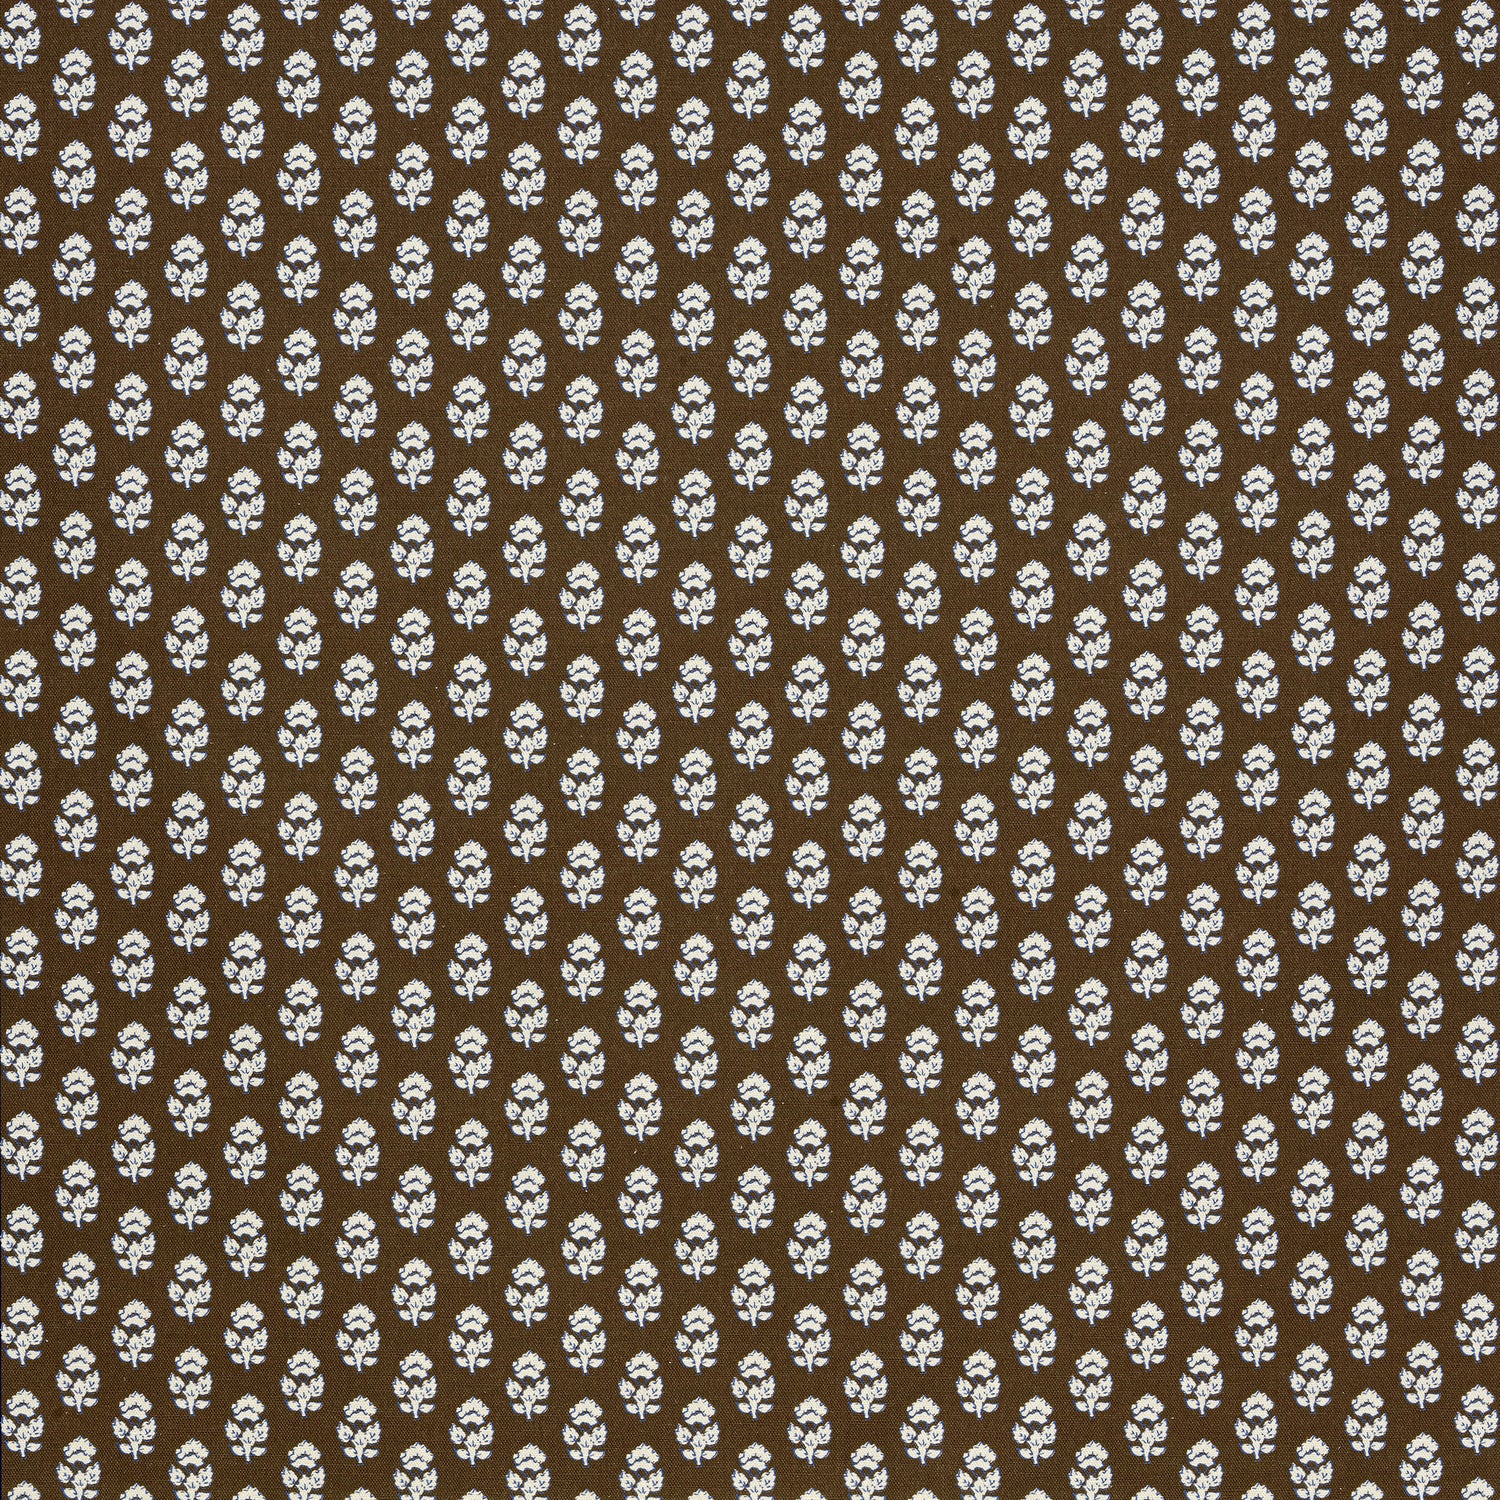 Julian fabric in brown color - pattern number AF15164 - by Anna French in the Antilles collection